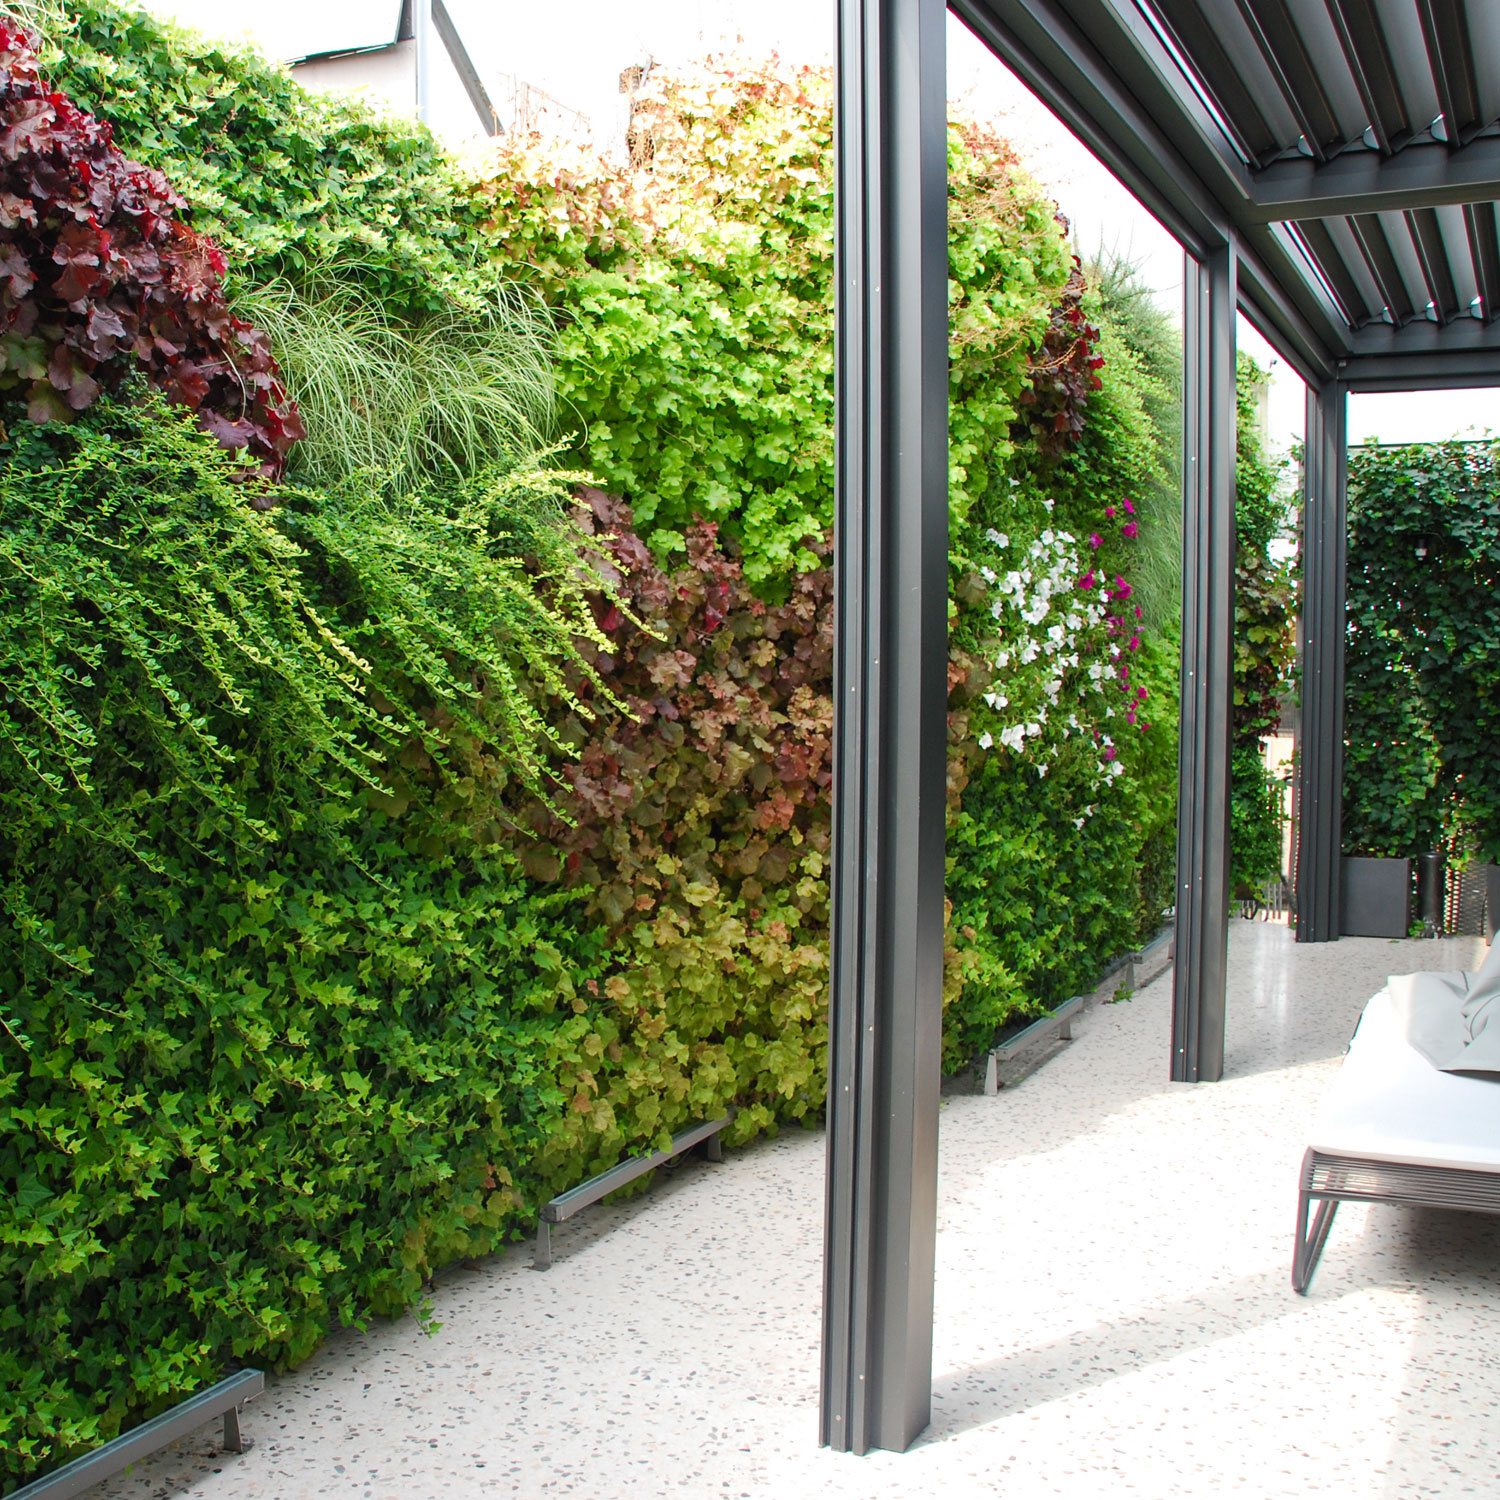 Design, realisation and maintenance of outdoor living walls